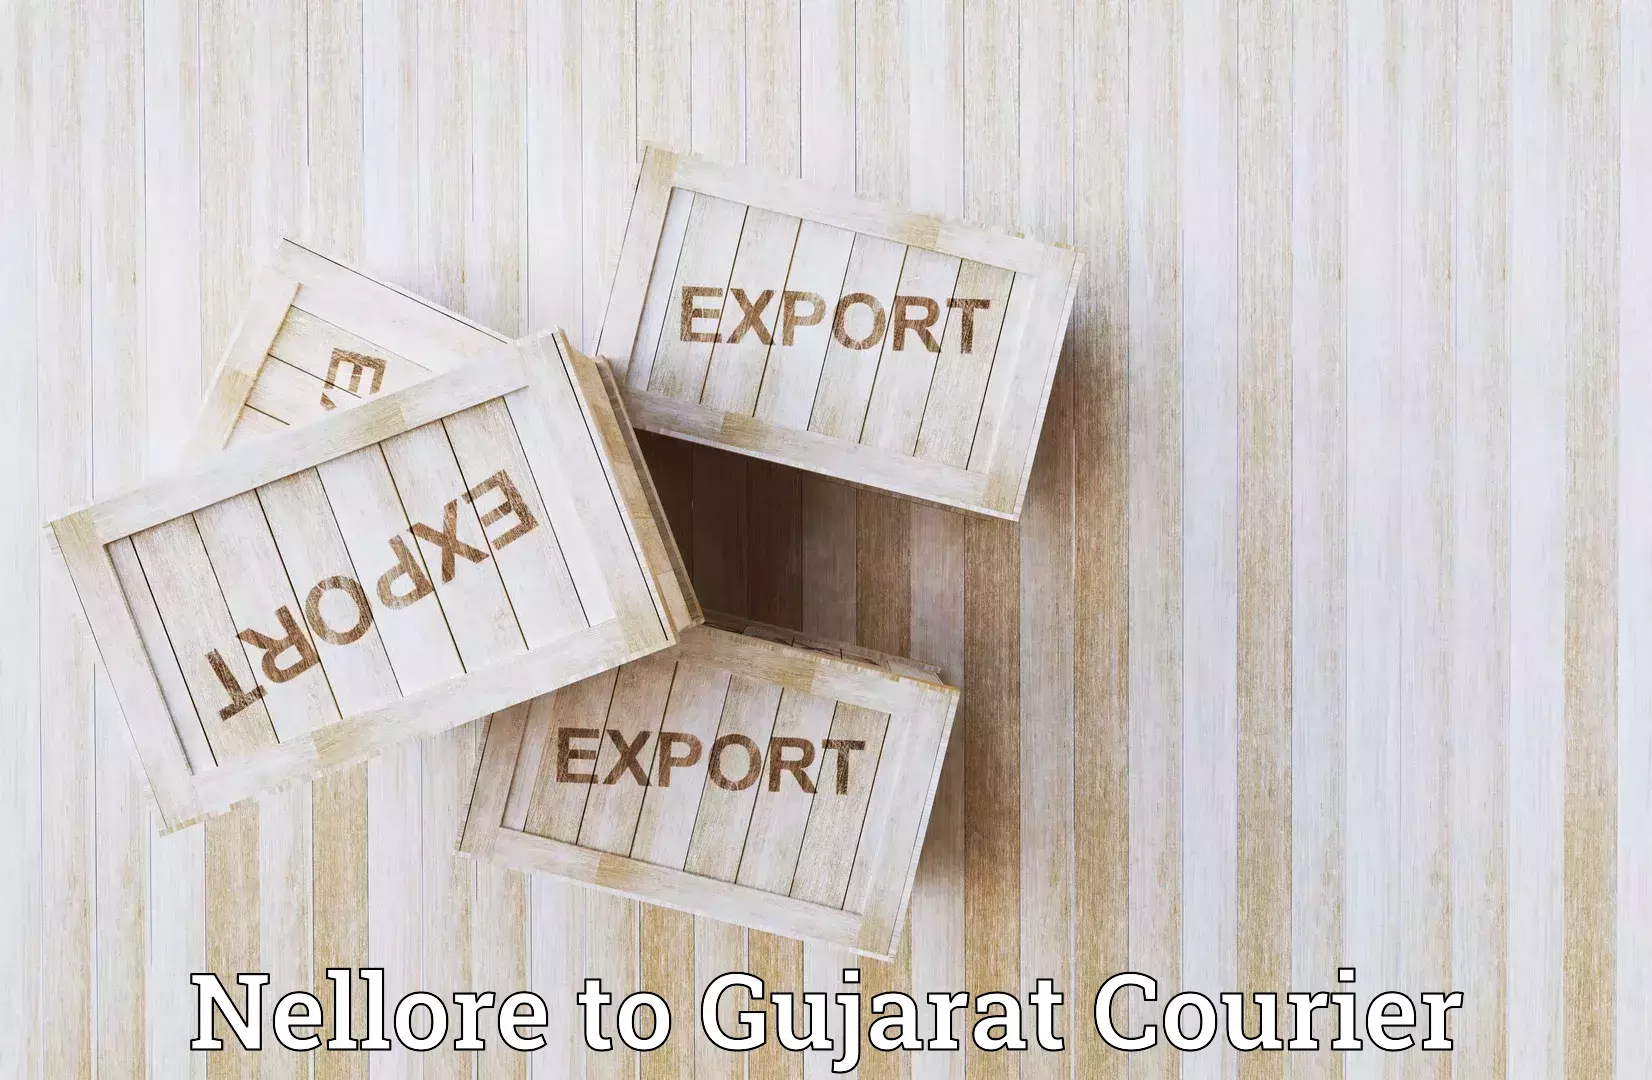 Rapid shipping services Nellore to Surat